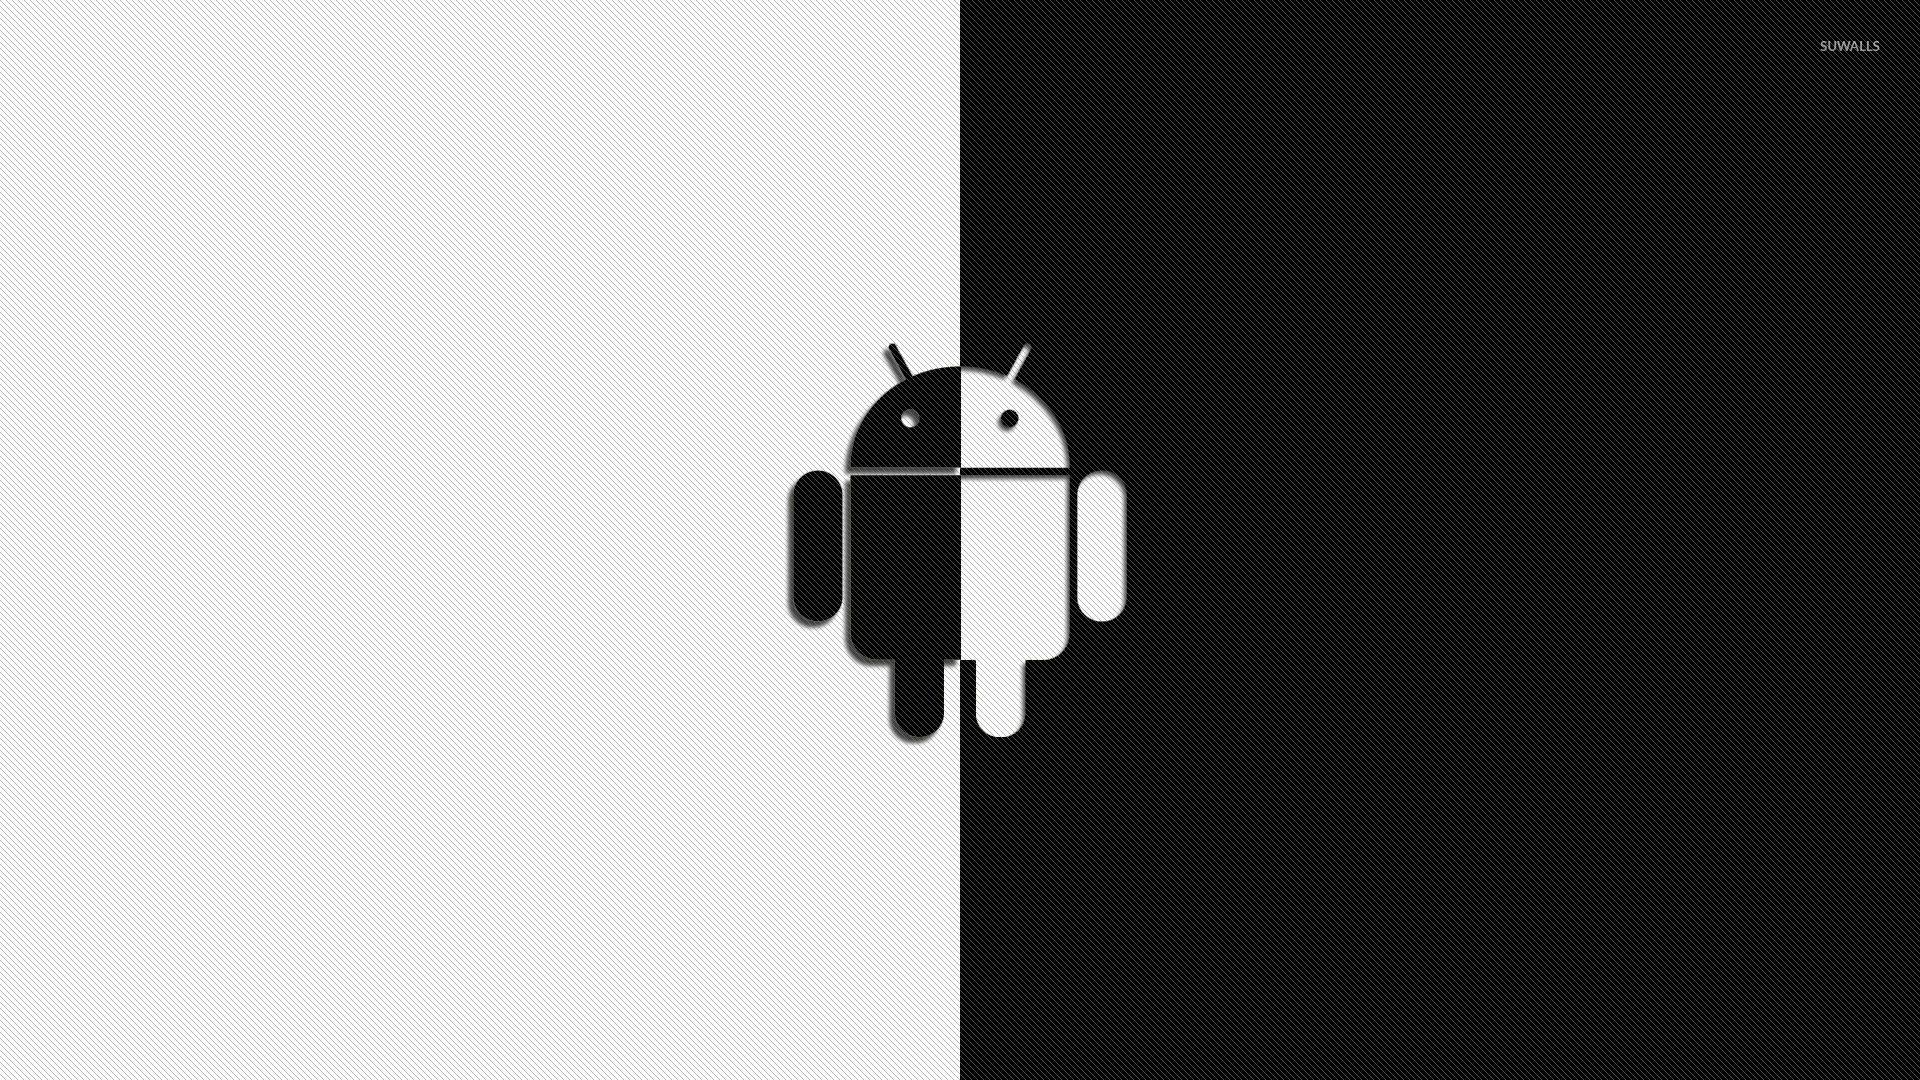 Black and white Android wallpaper wallpaper